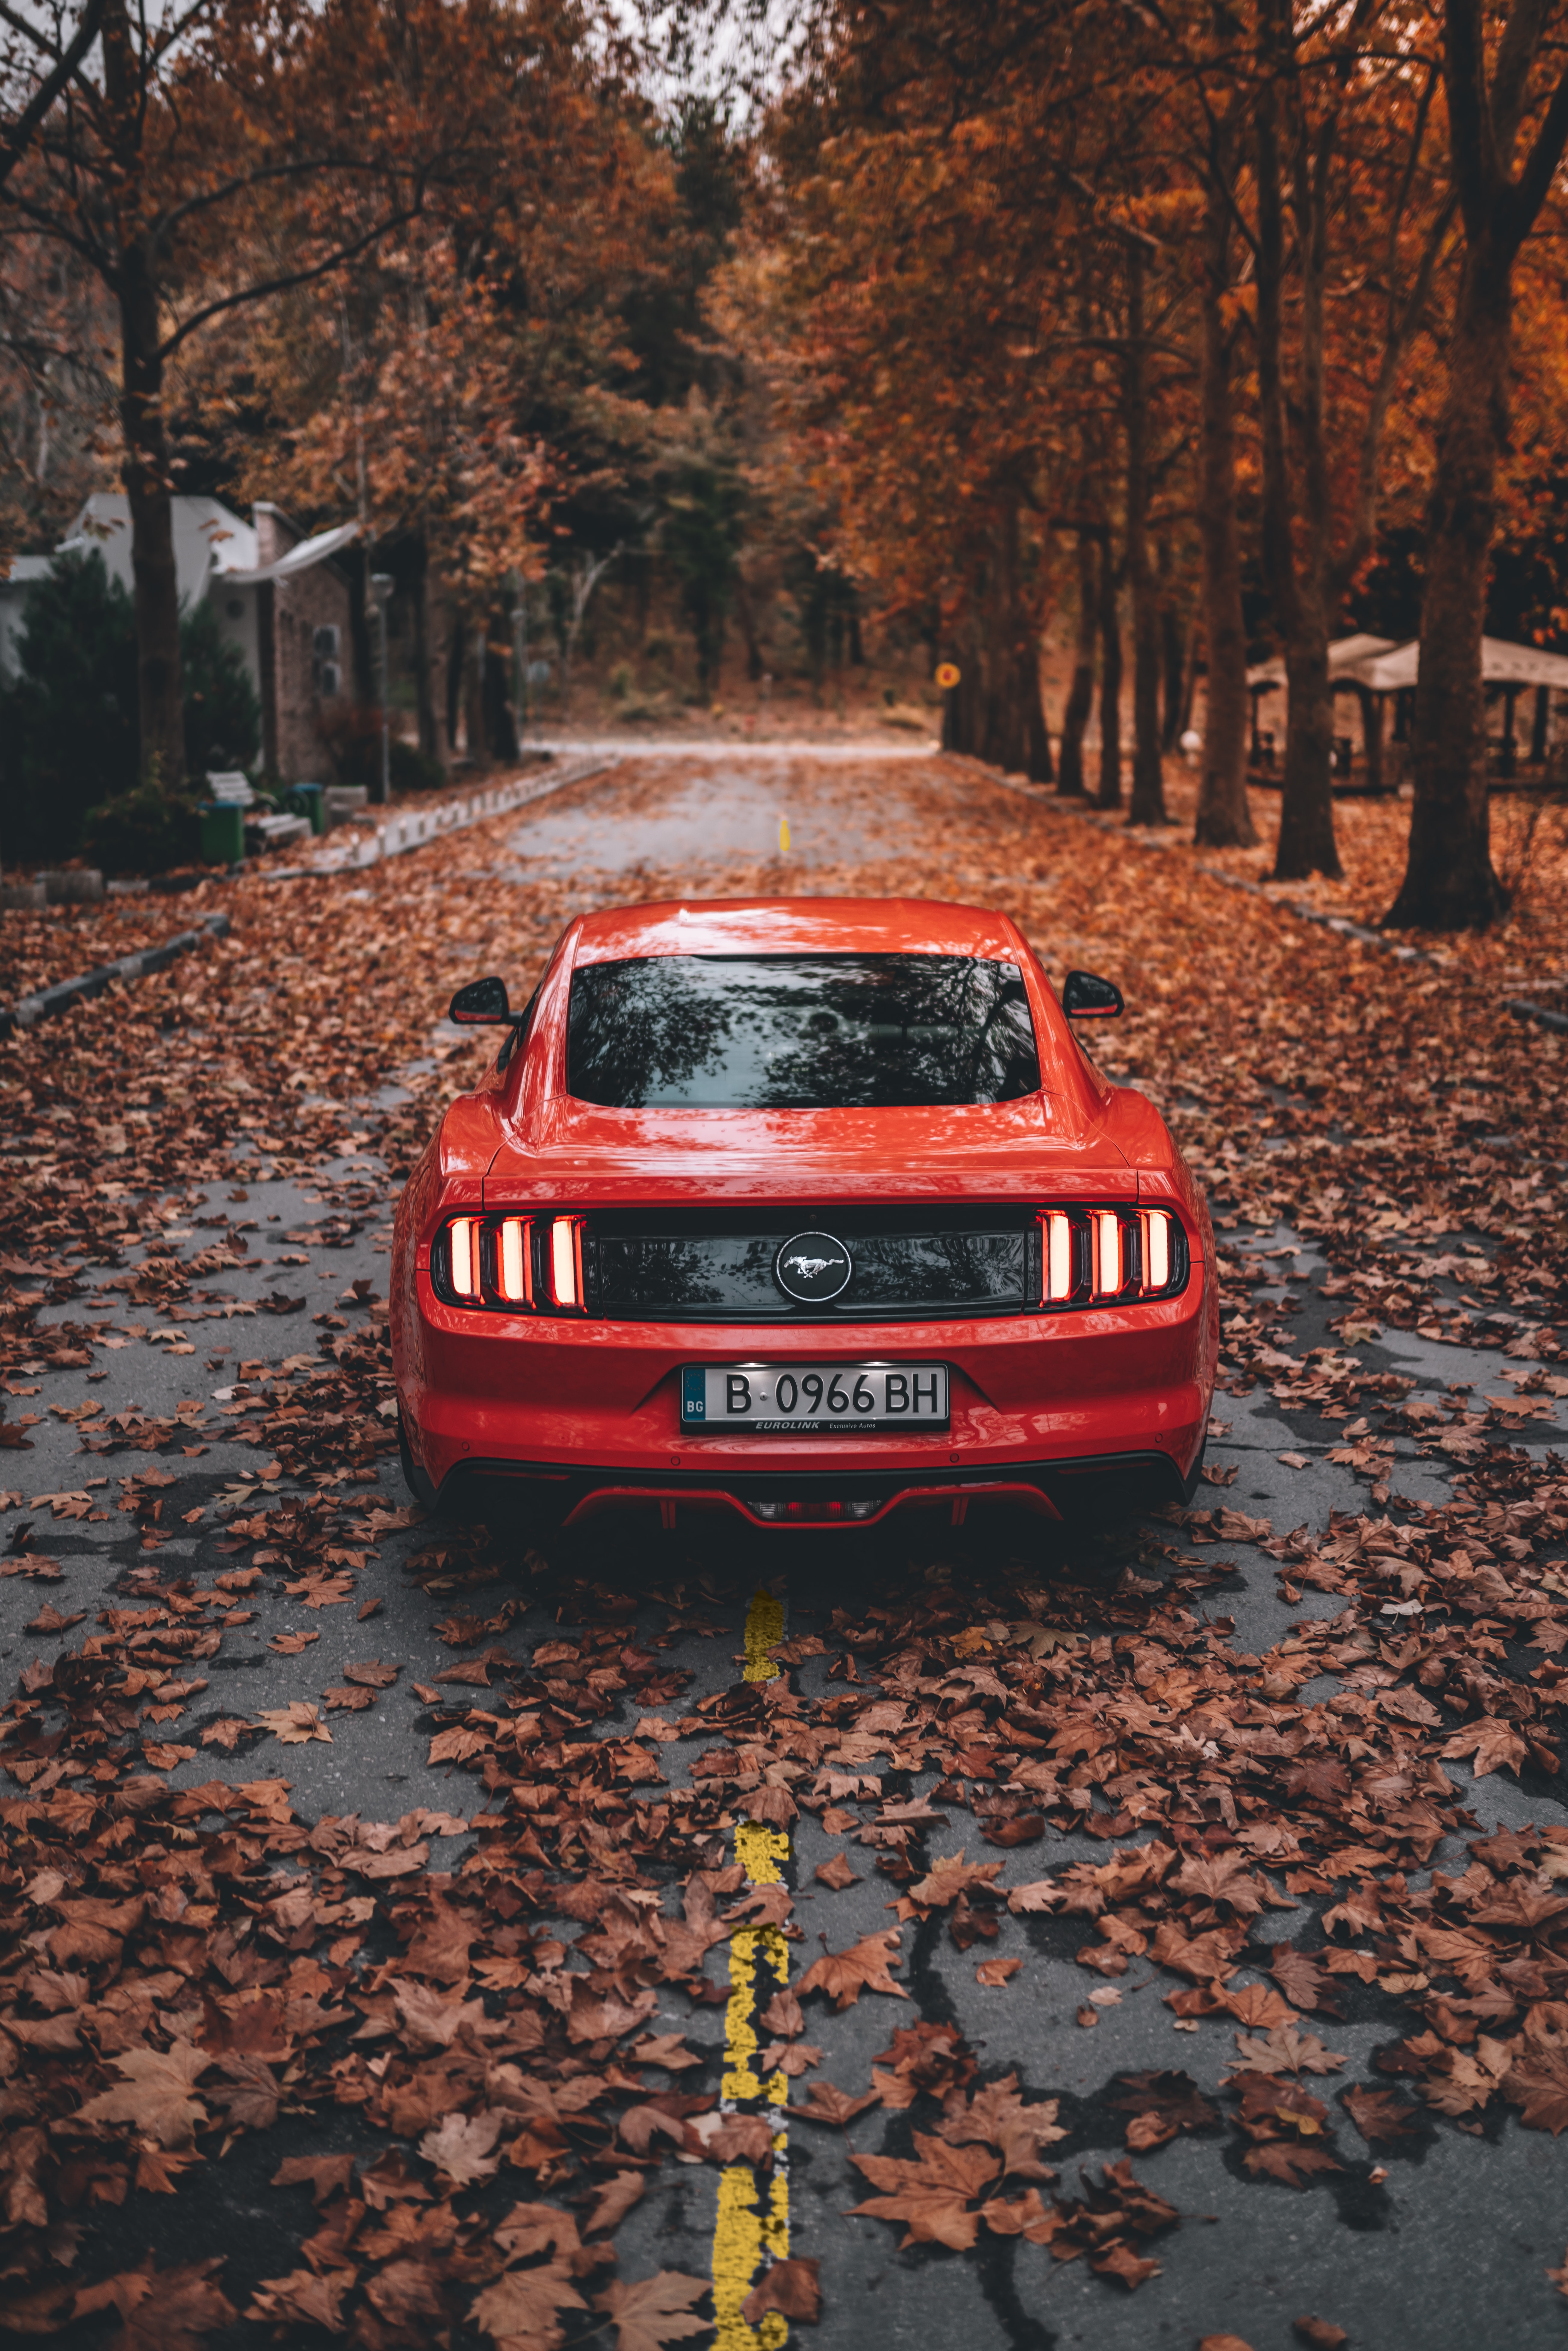 ford mustang, sports car, ford, car, cars, autumn, sports, red, road iphone wallpaper